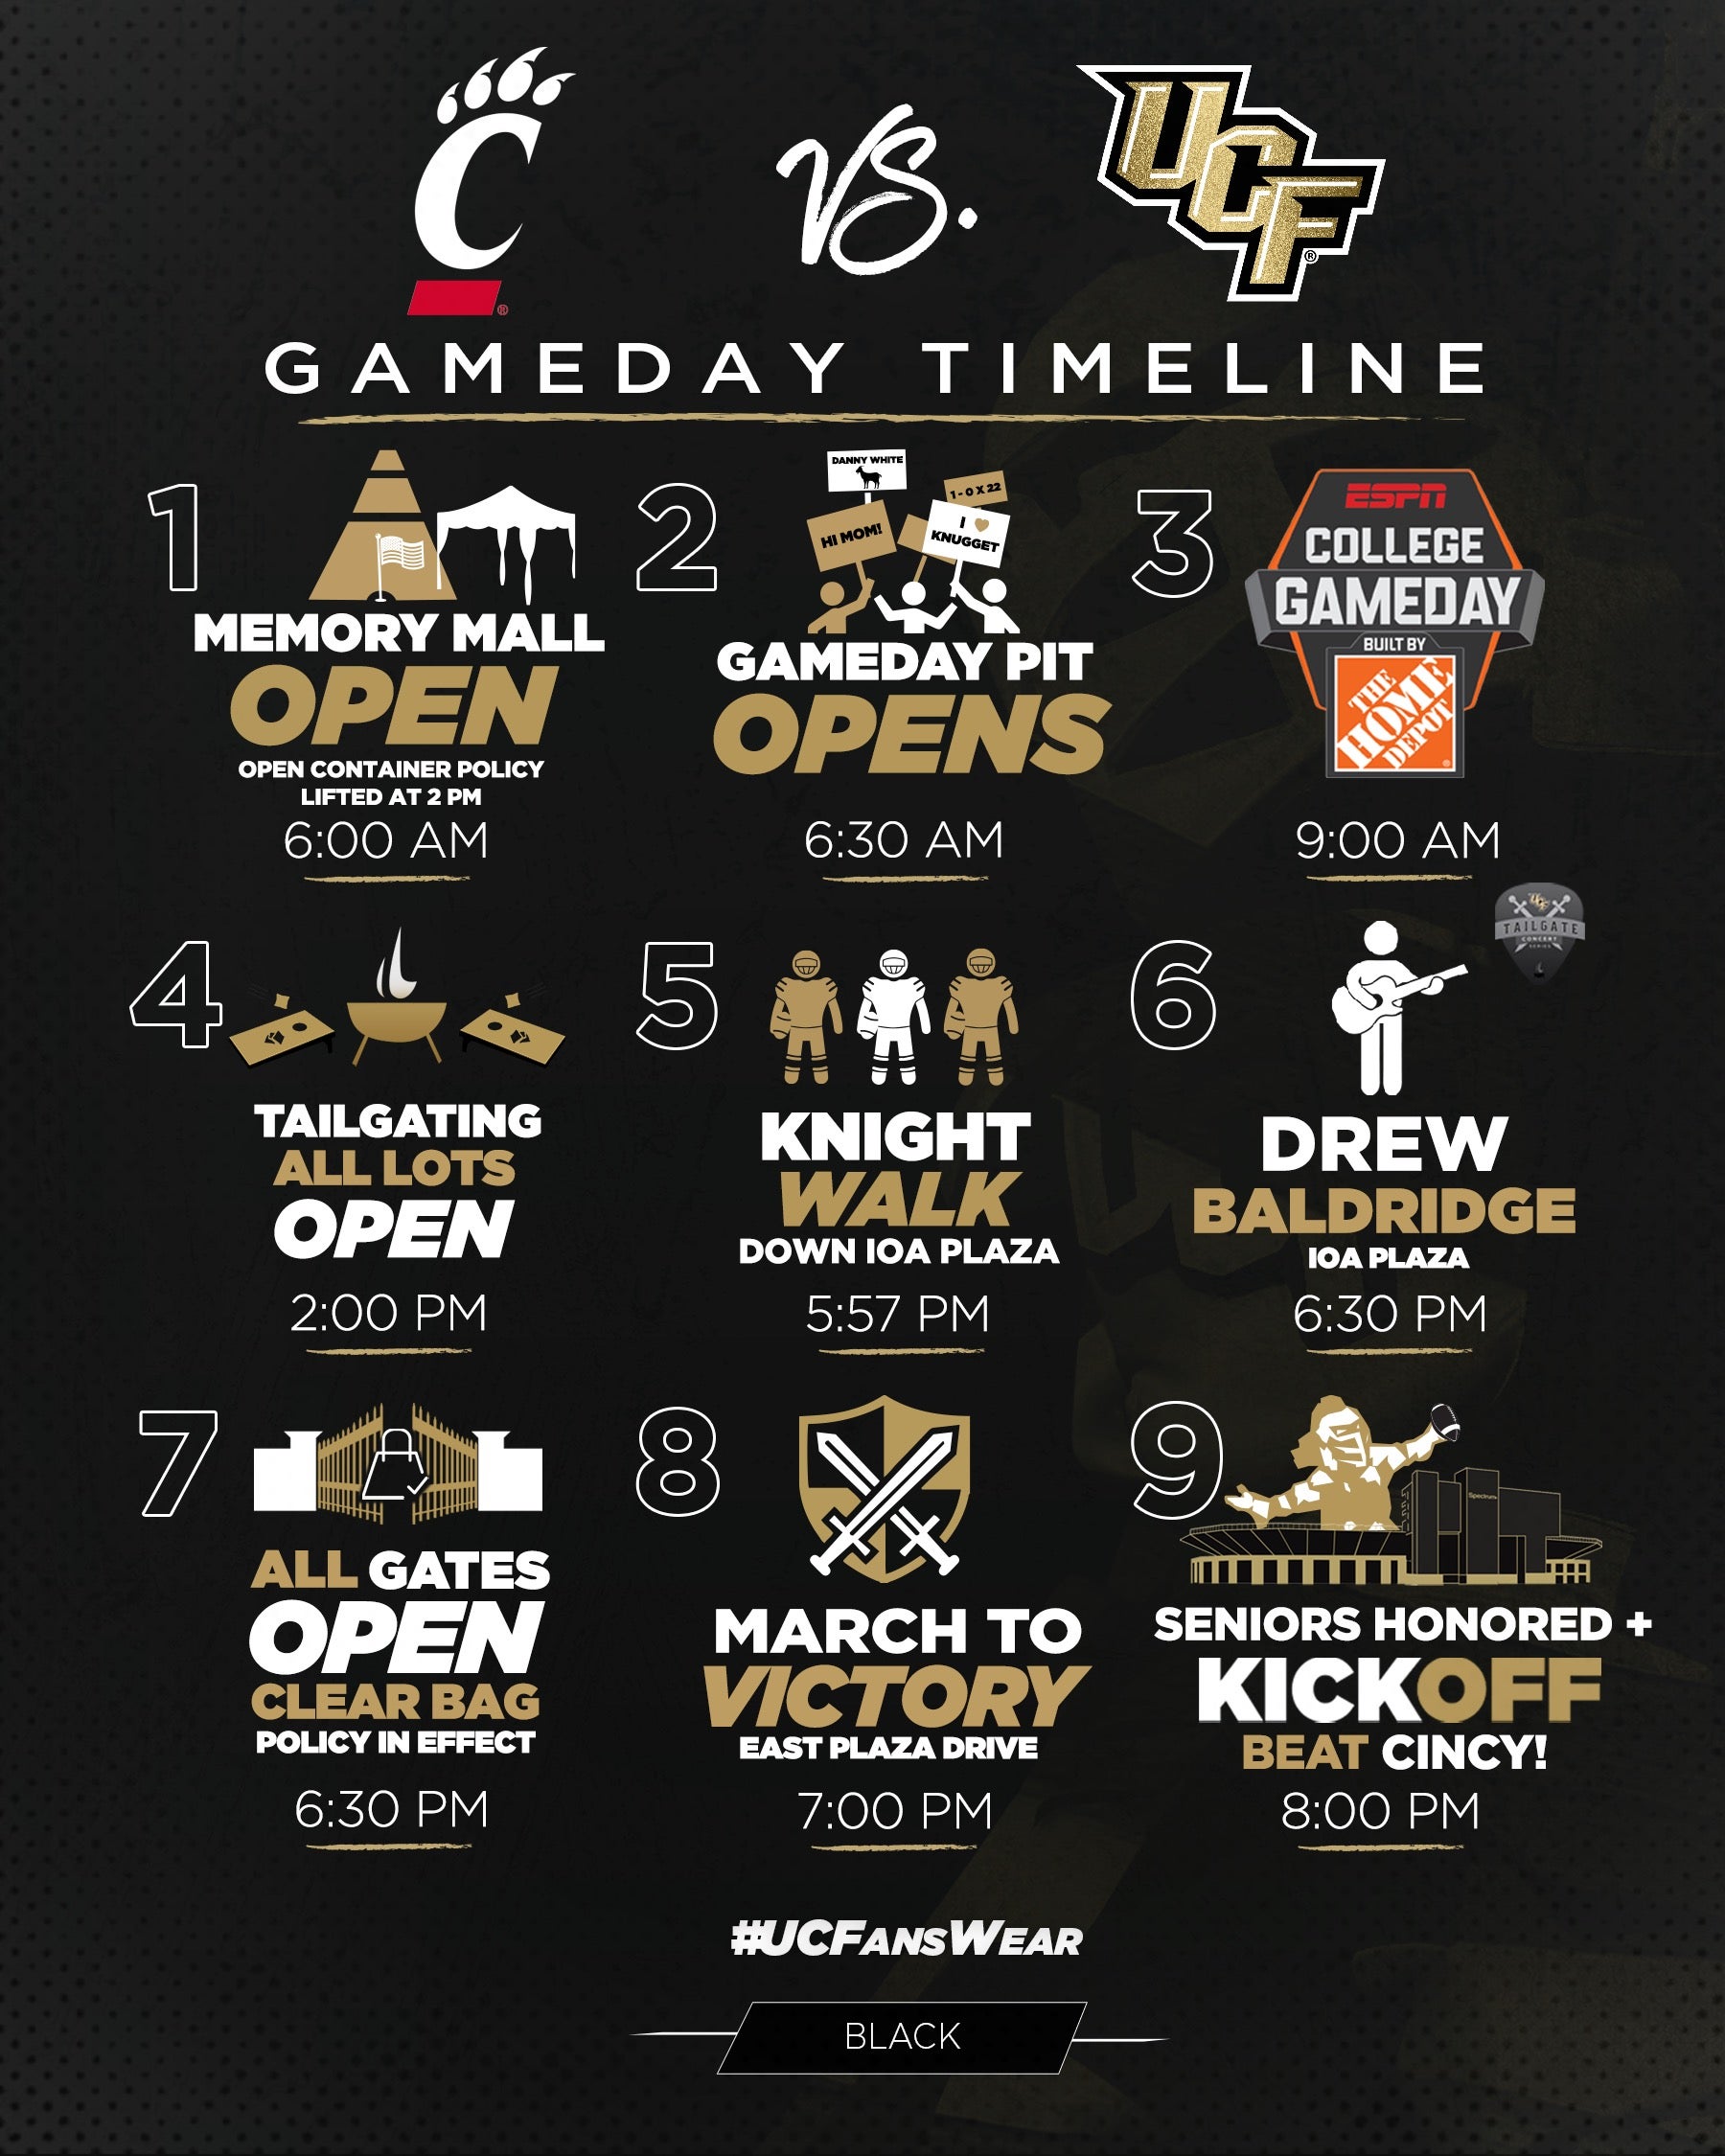 Gameday timeline in graphic form